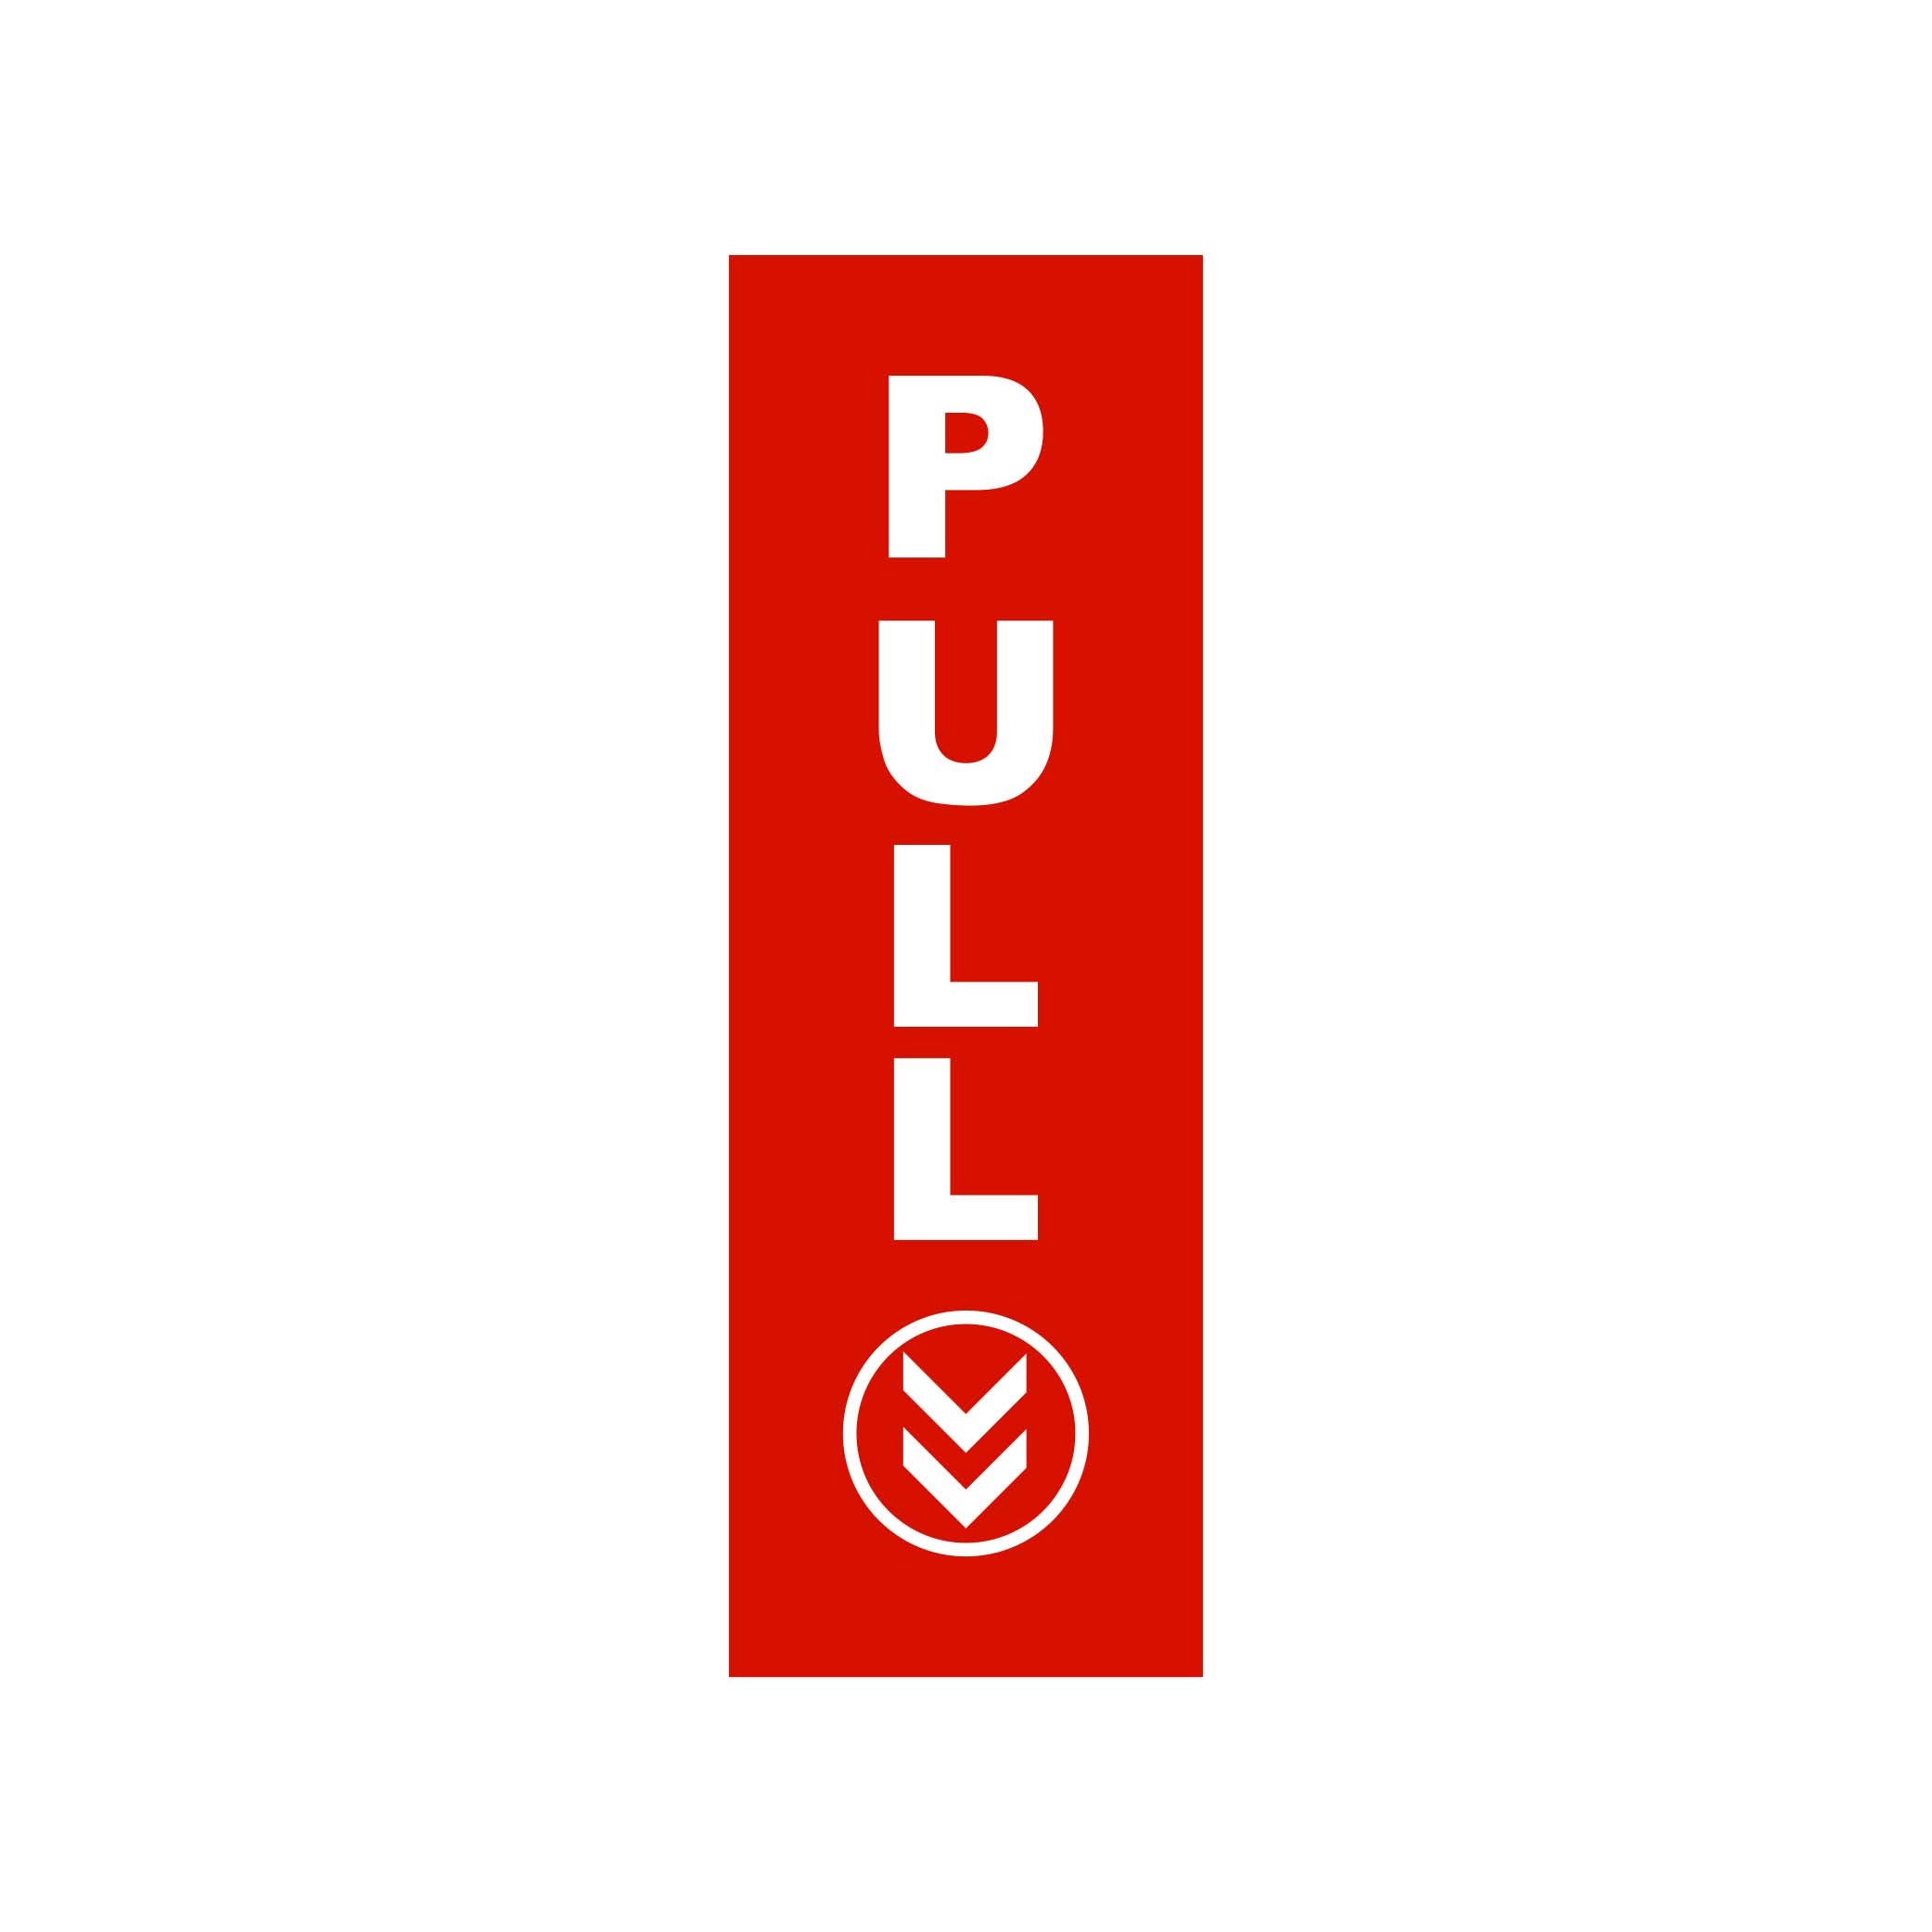 PULL SIGN - GET SIGNS AUSTRALIA